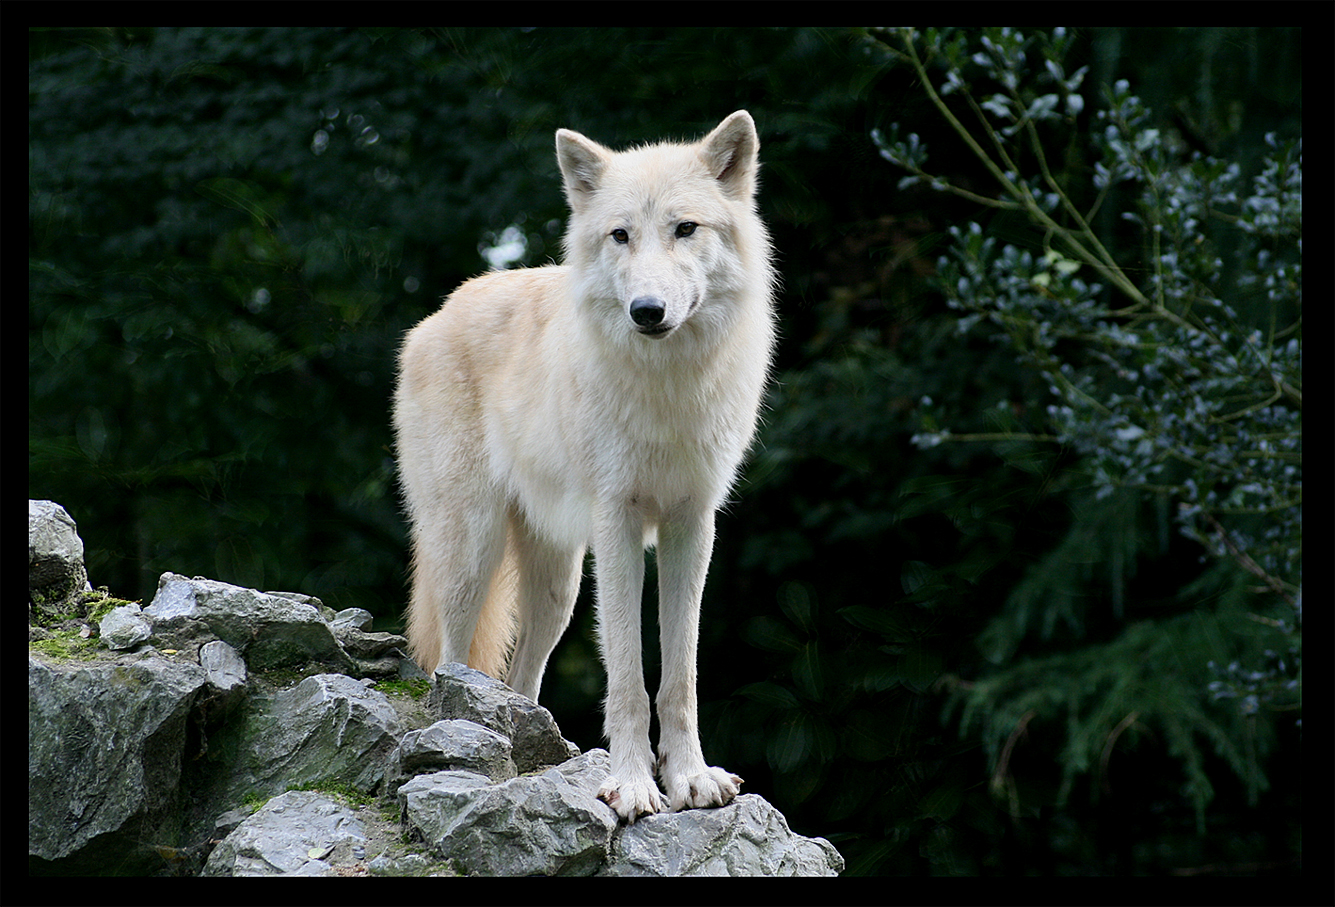 The white wolf by Lunchi